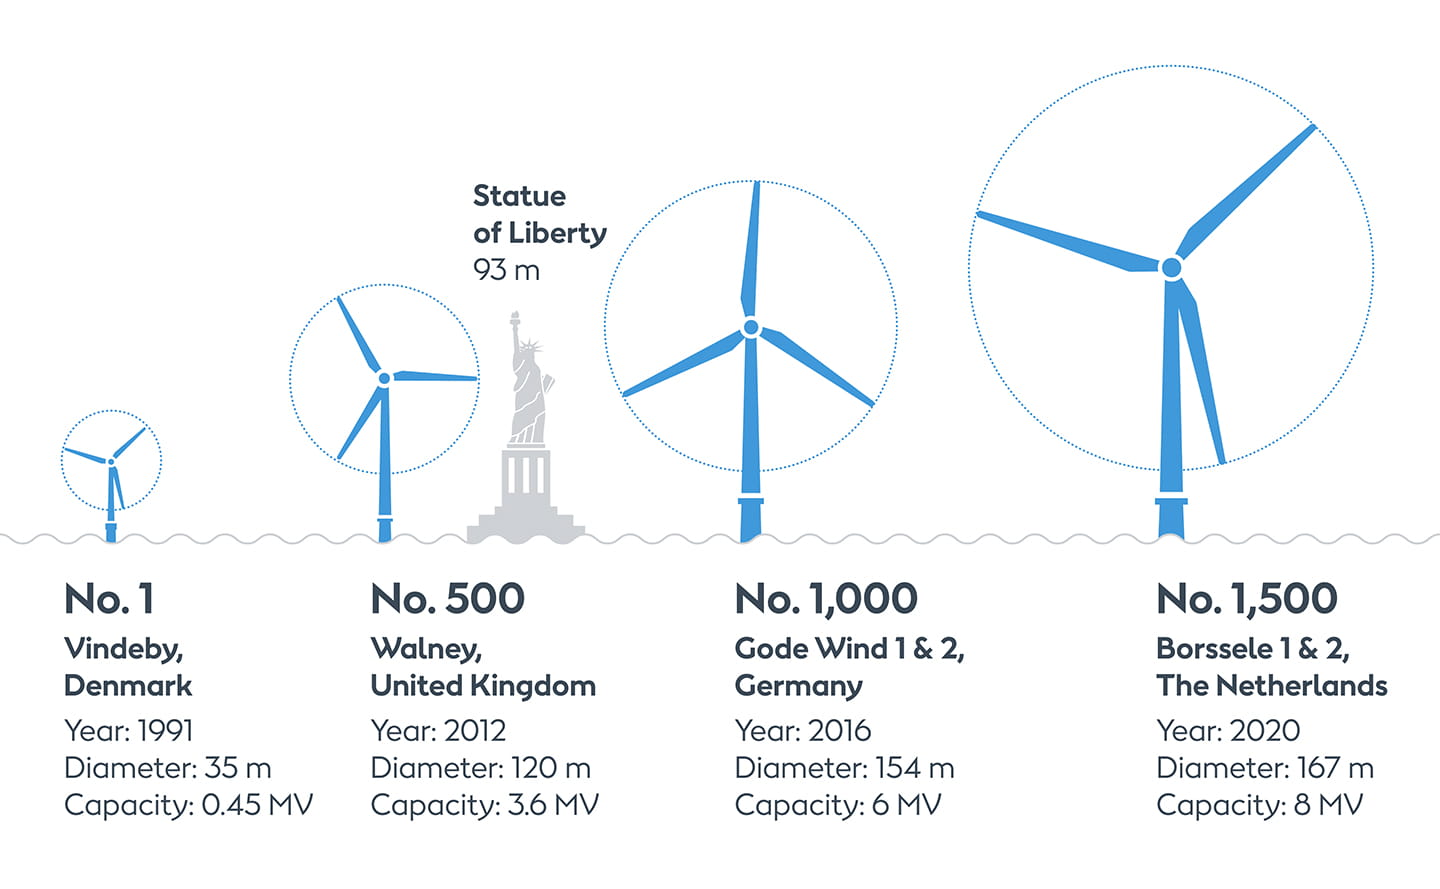 A graphic displaying how Ørsted's offshore wind turbines have increased in size from 1991 to 2020.